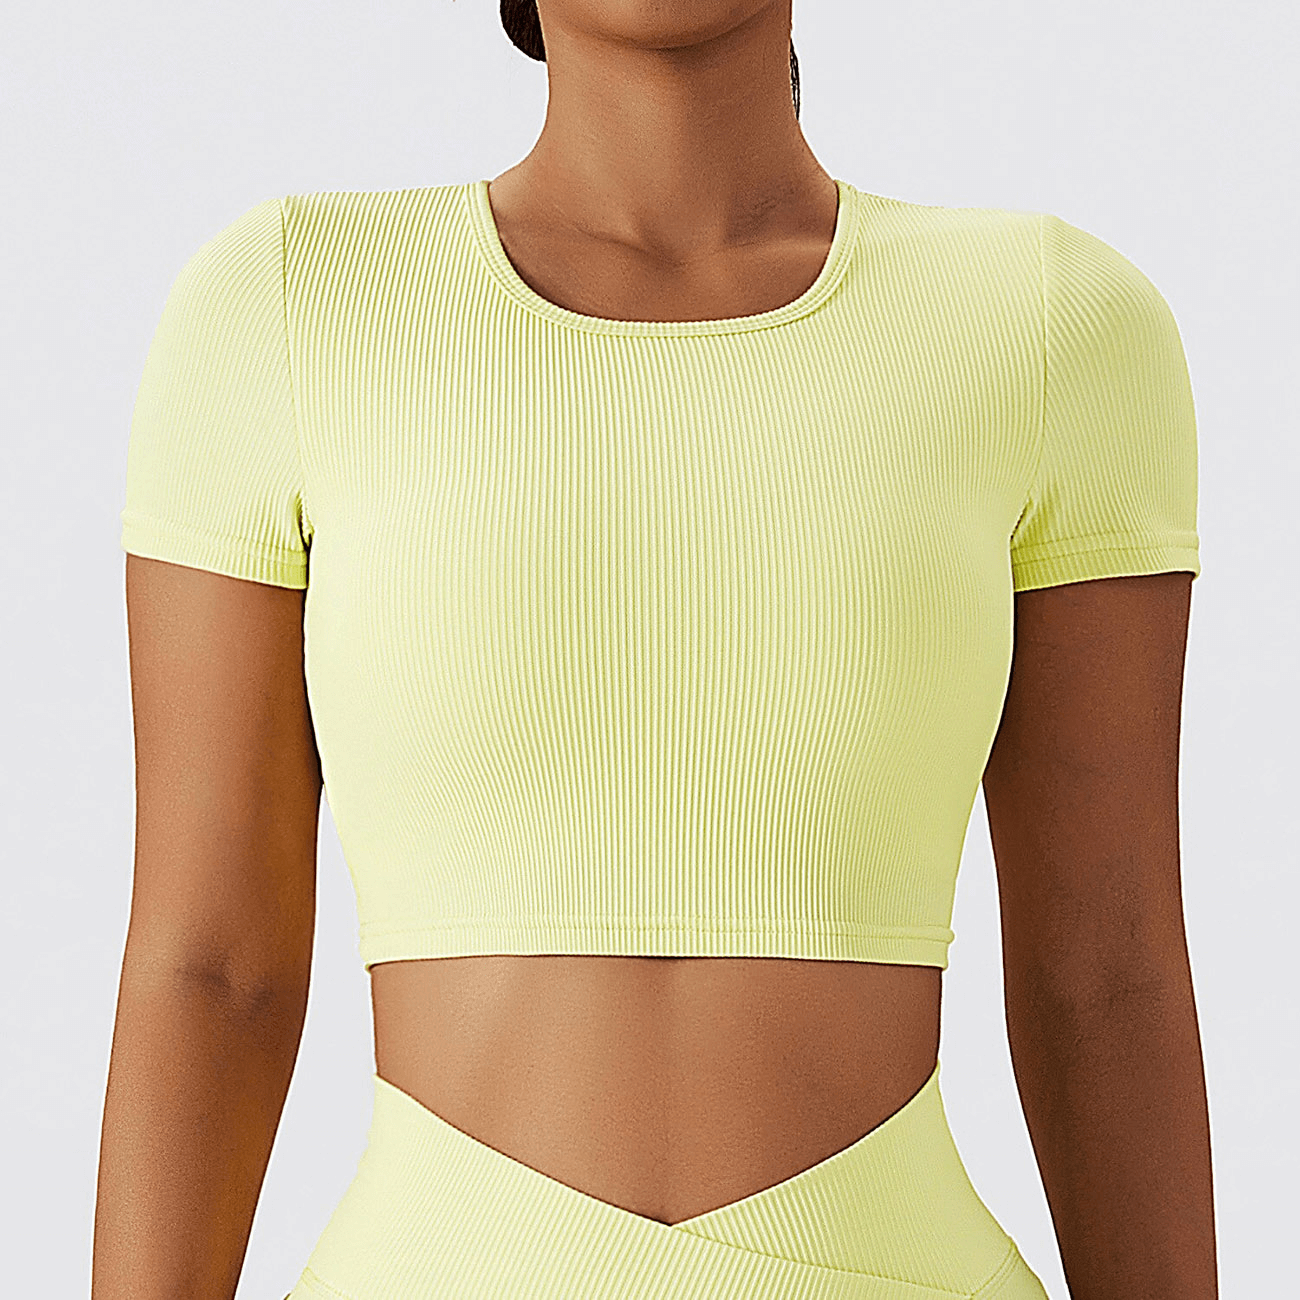 Running Sexy Sports T-Shirt with Open Back / Women's Fitness Crop Top - SF0010